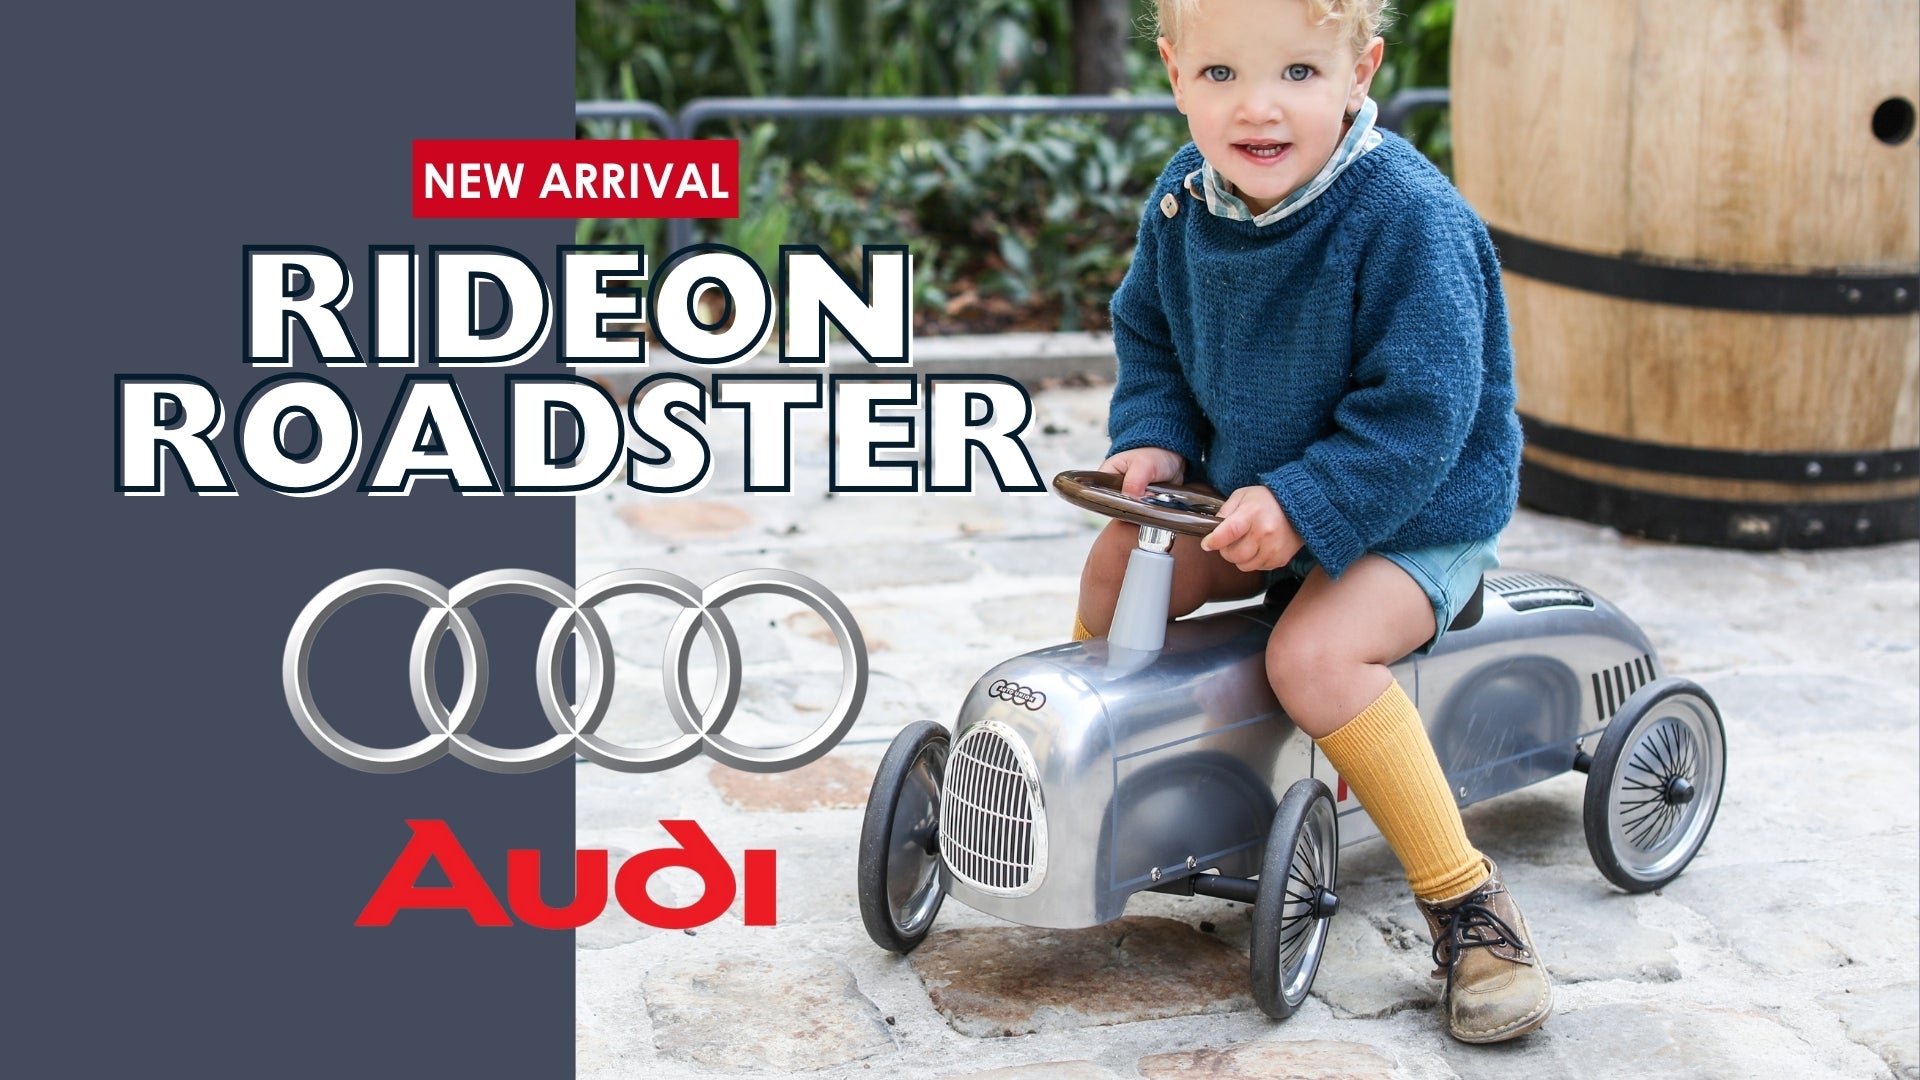 A Kid is riding the new Baghera Rideon Roadster AUDI